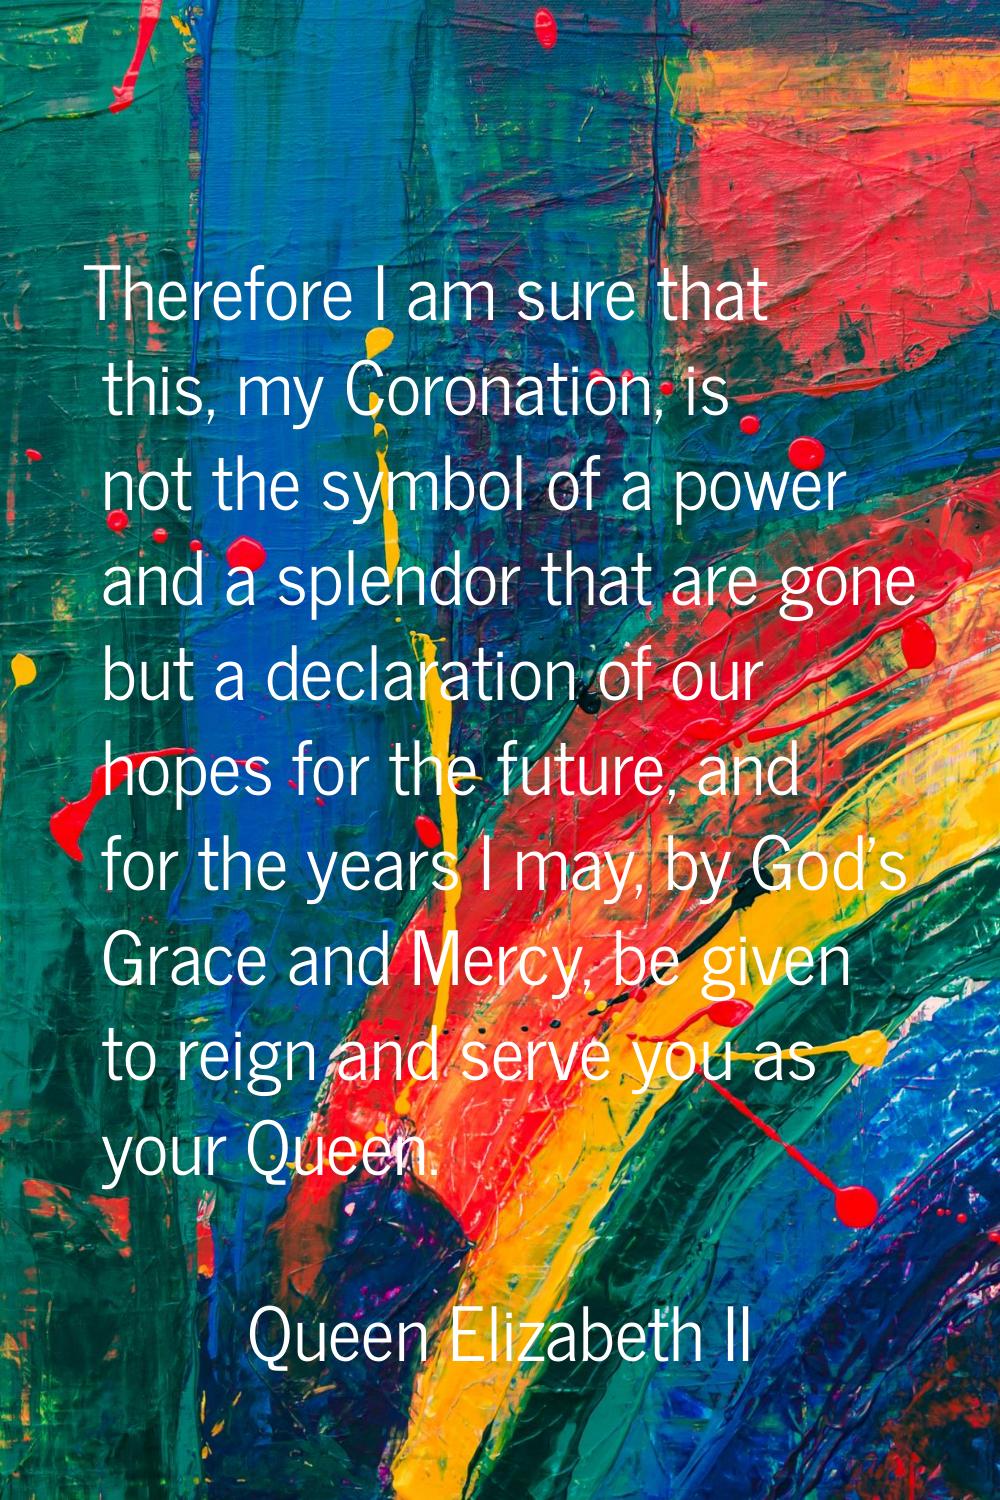 Therefore I am sure that this, my Coronation, is not the symbol of a power and a splendor that are 